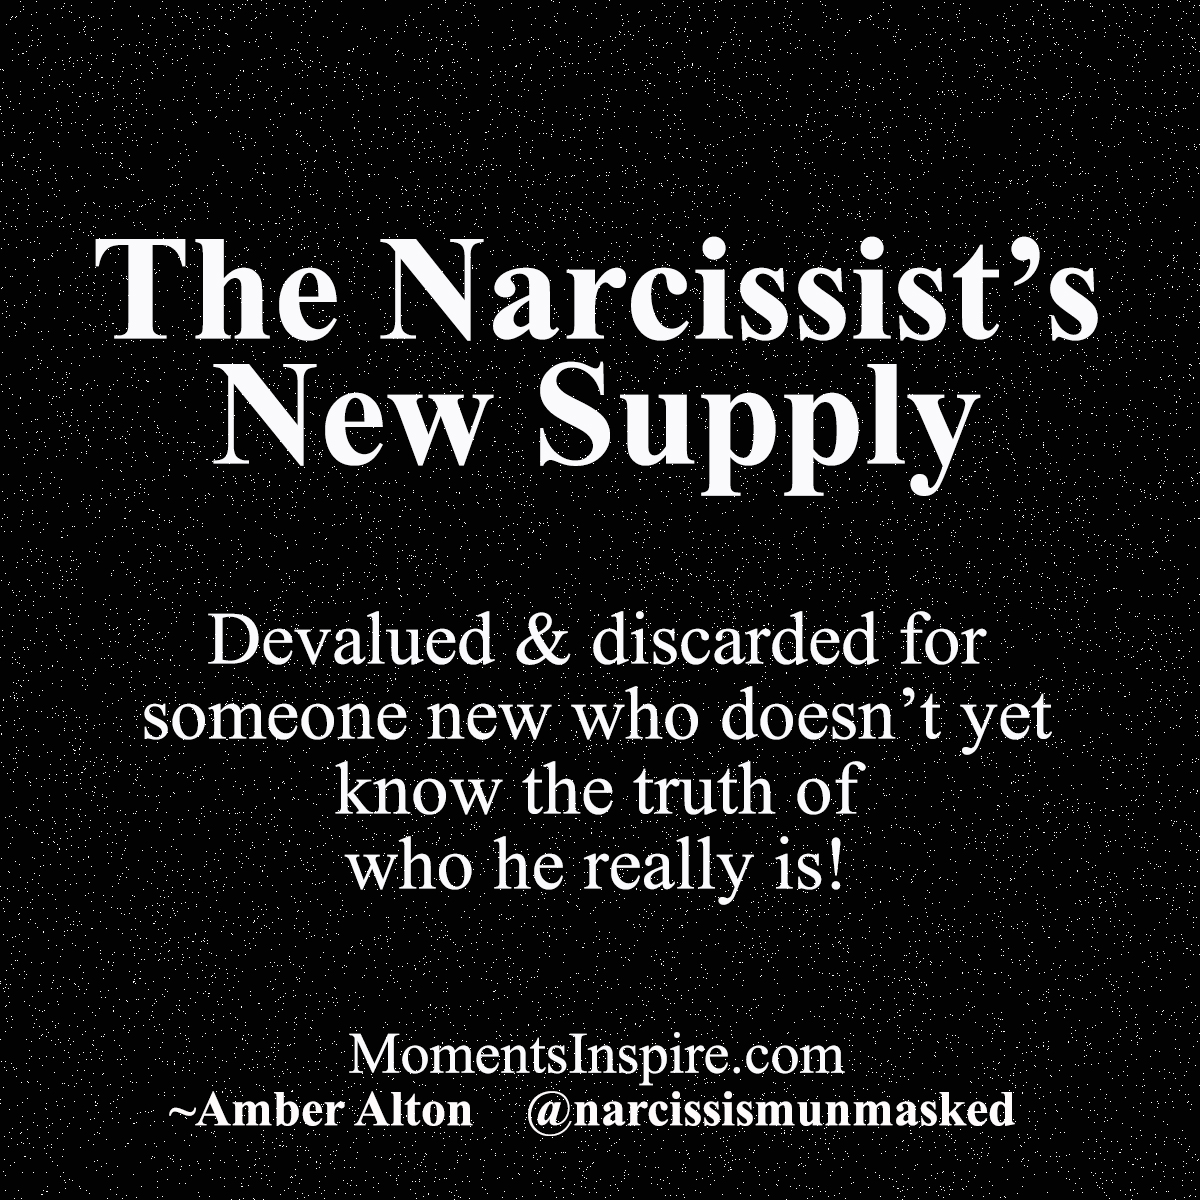 When a narcissist loses supply